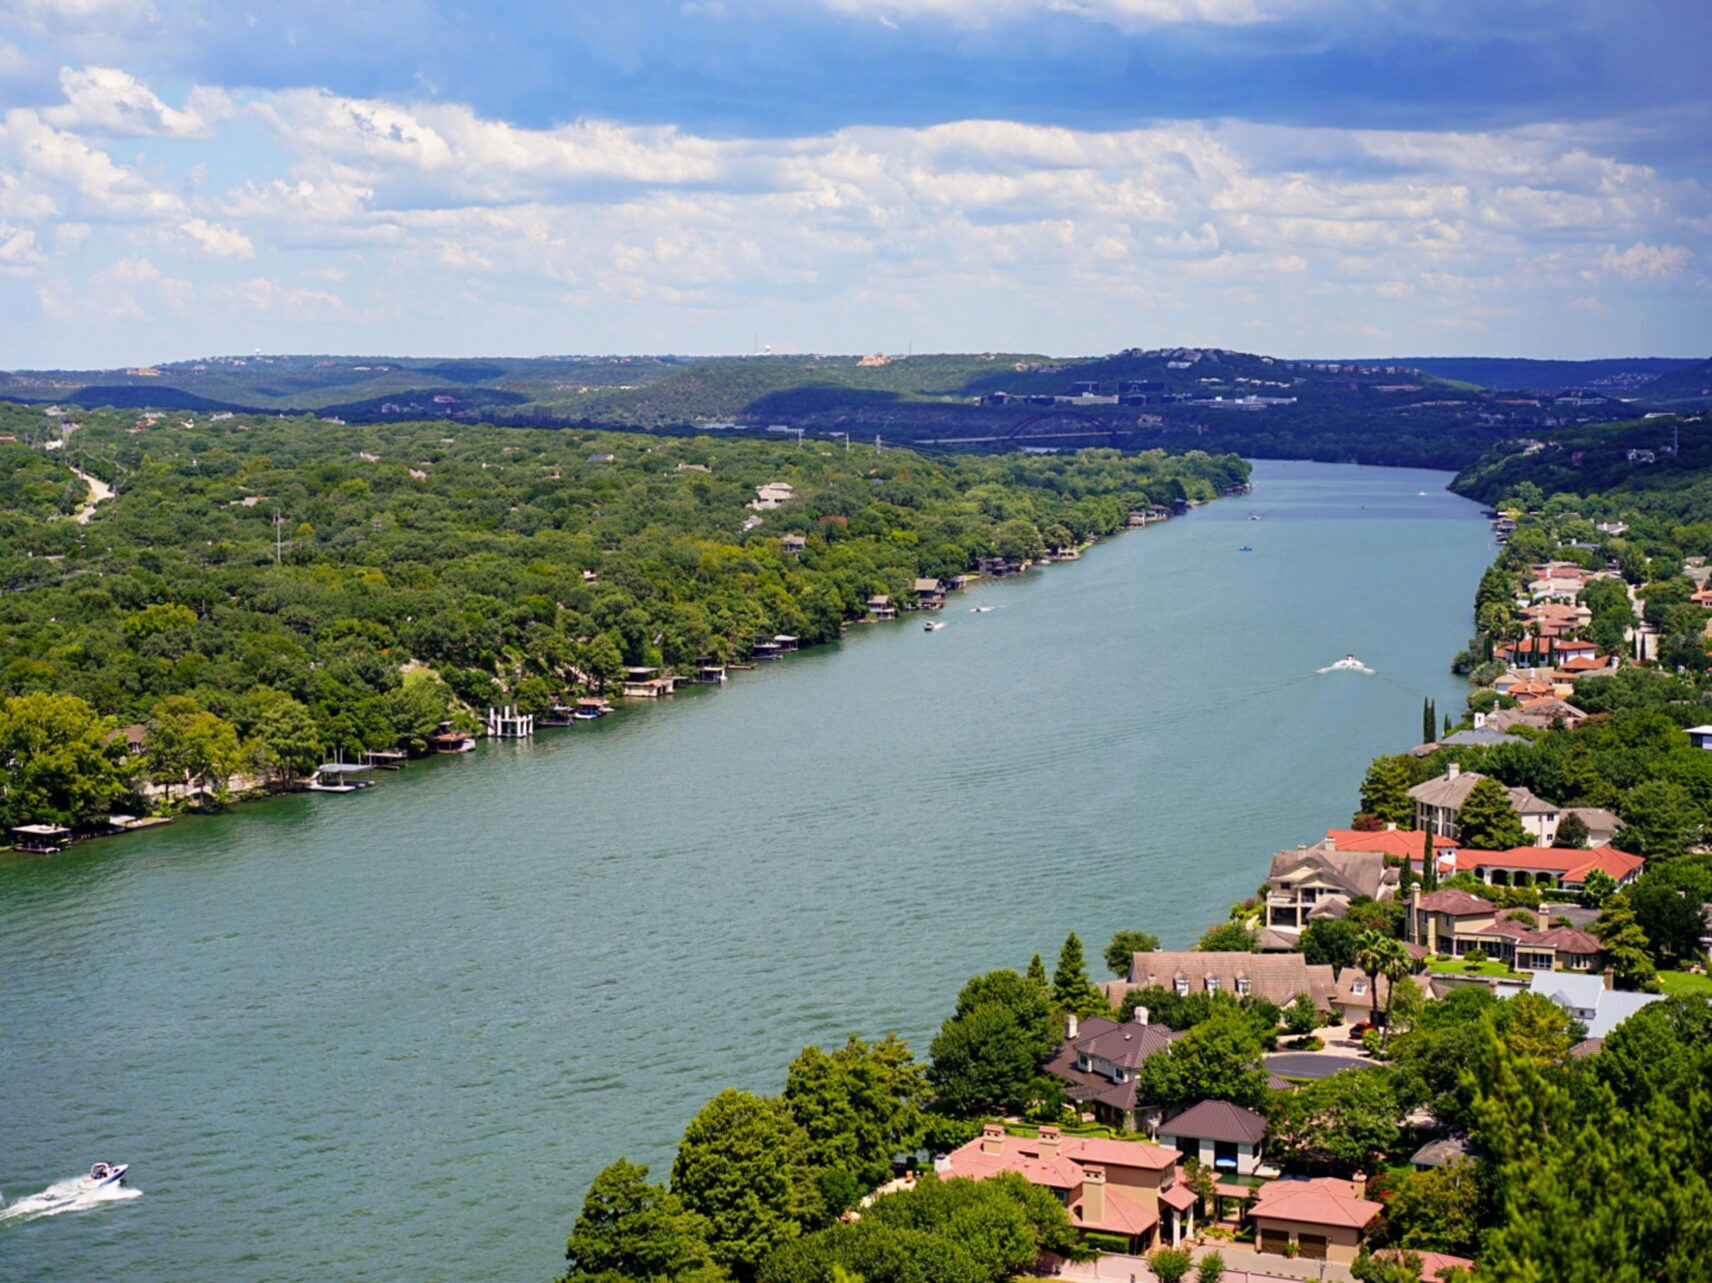 Overhead view of the lake and Lakefront houses on Lake Austin